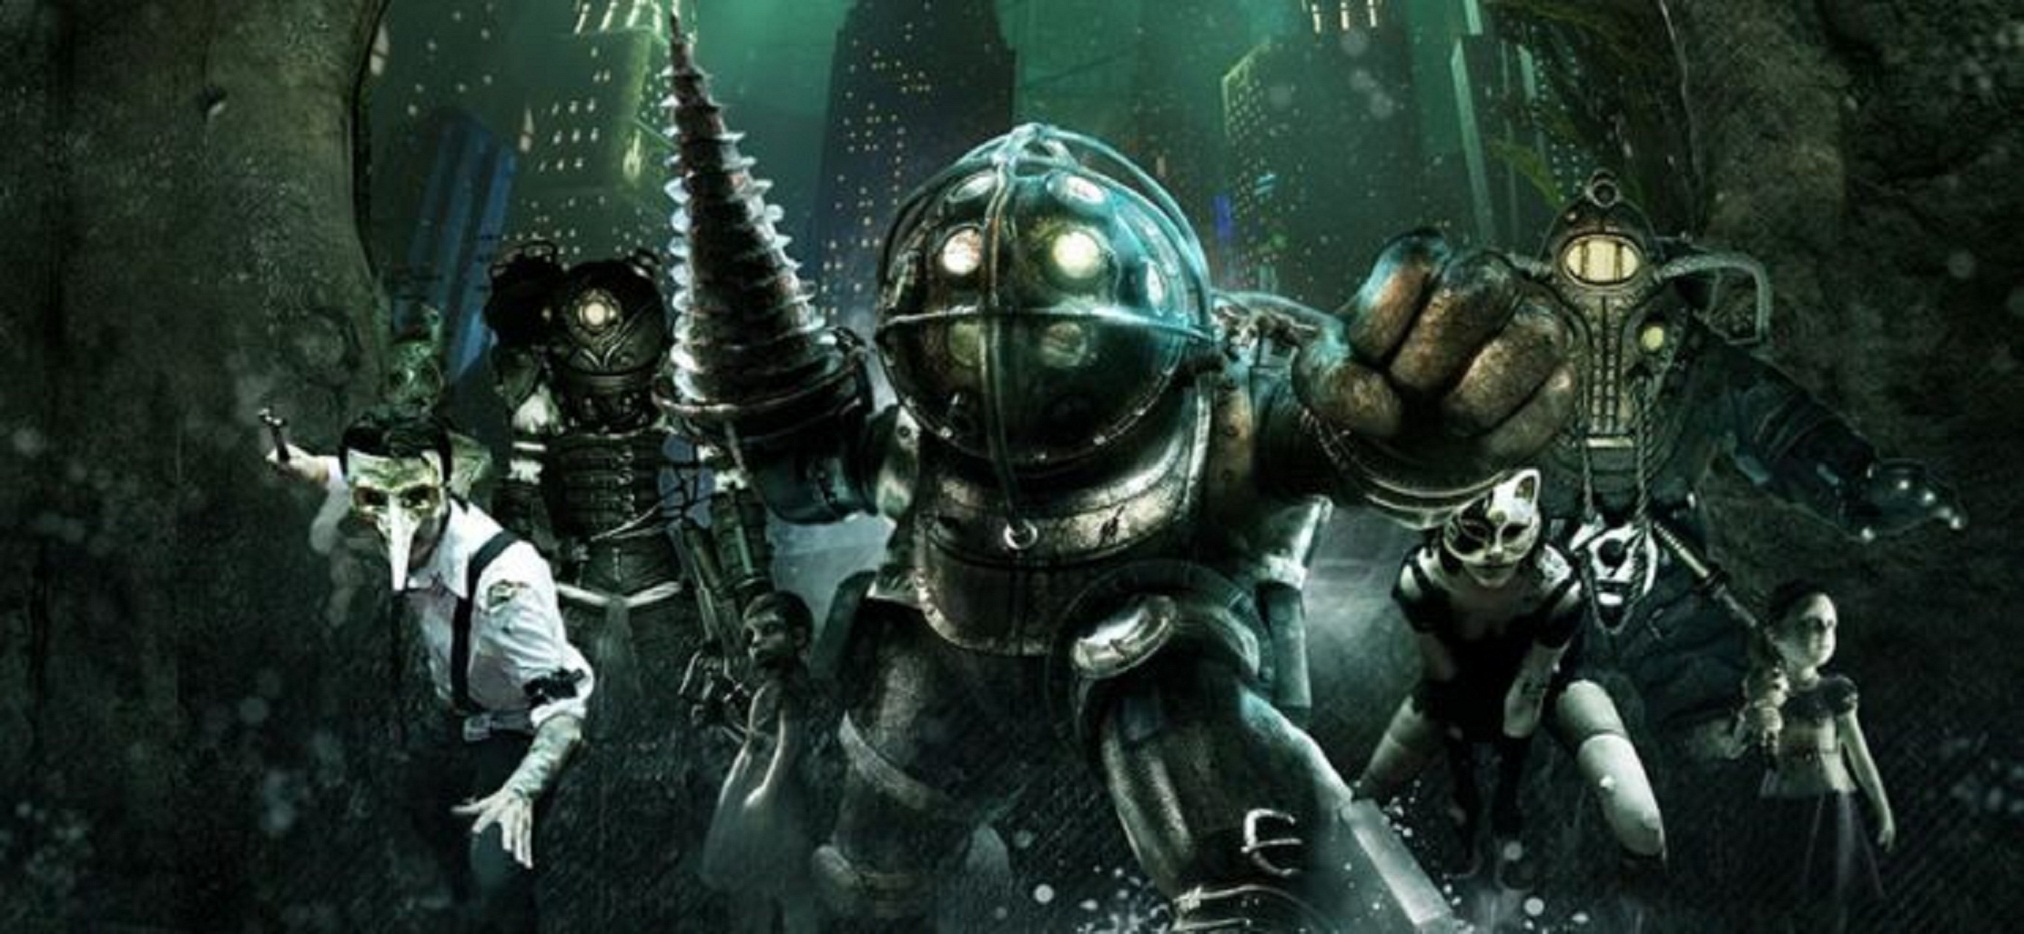 BioShock: The Collection Short Nintendo Switch Review – Launches On Switch Fully Remastered With A Comprehensive DLC